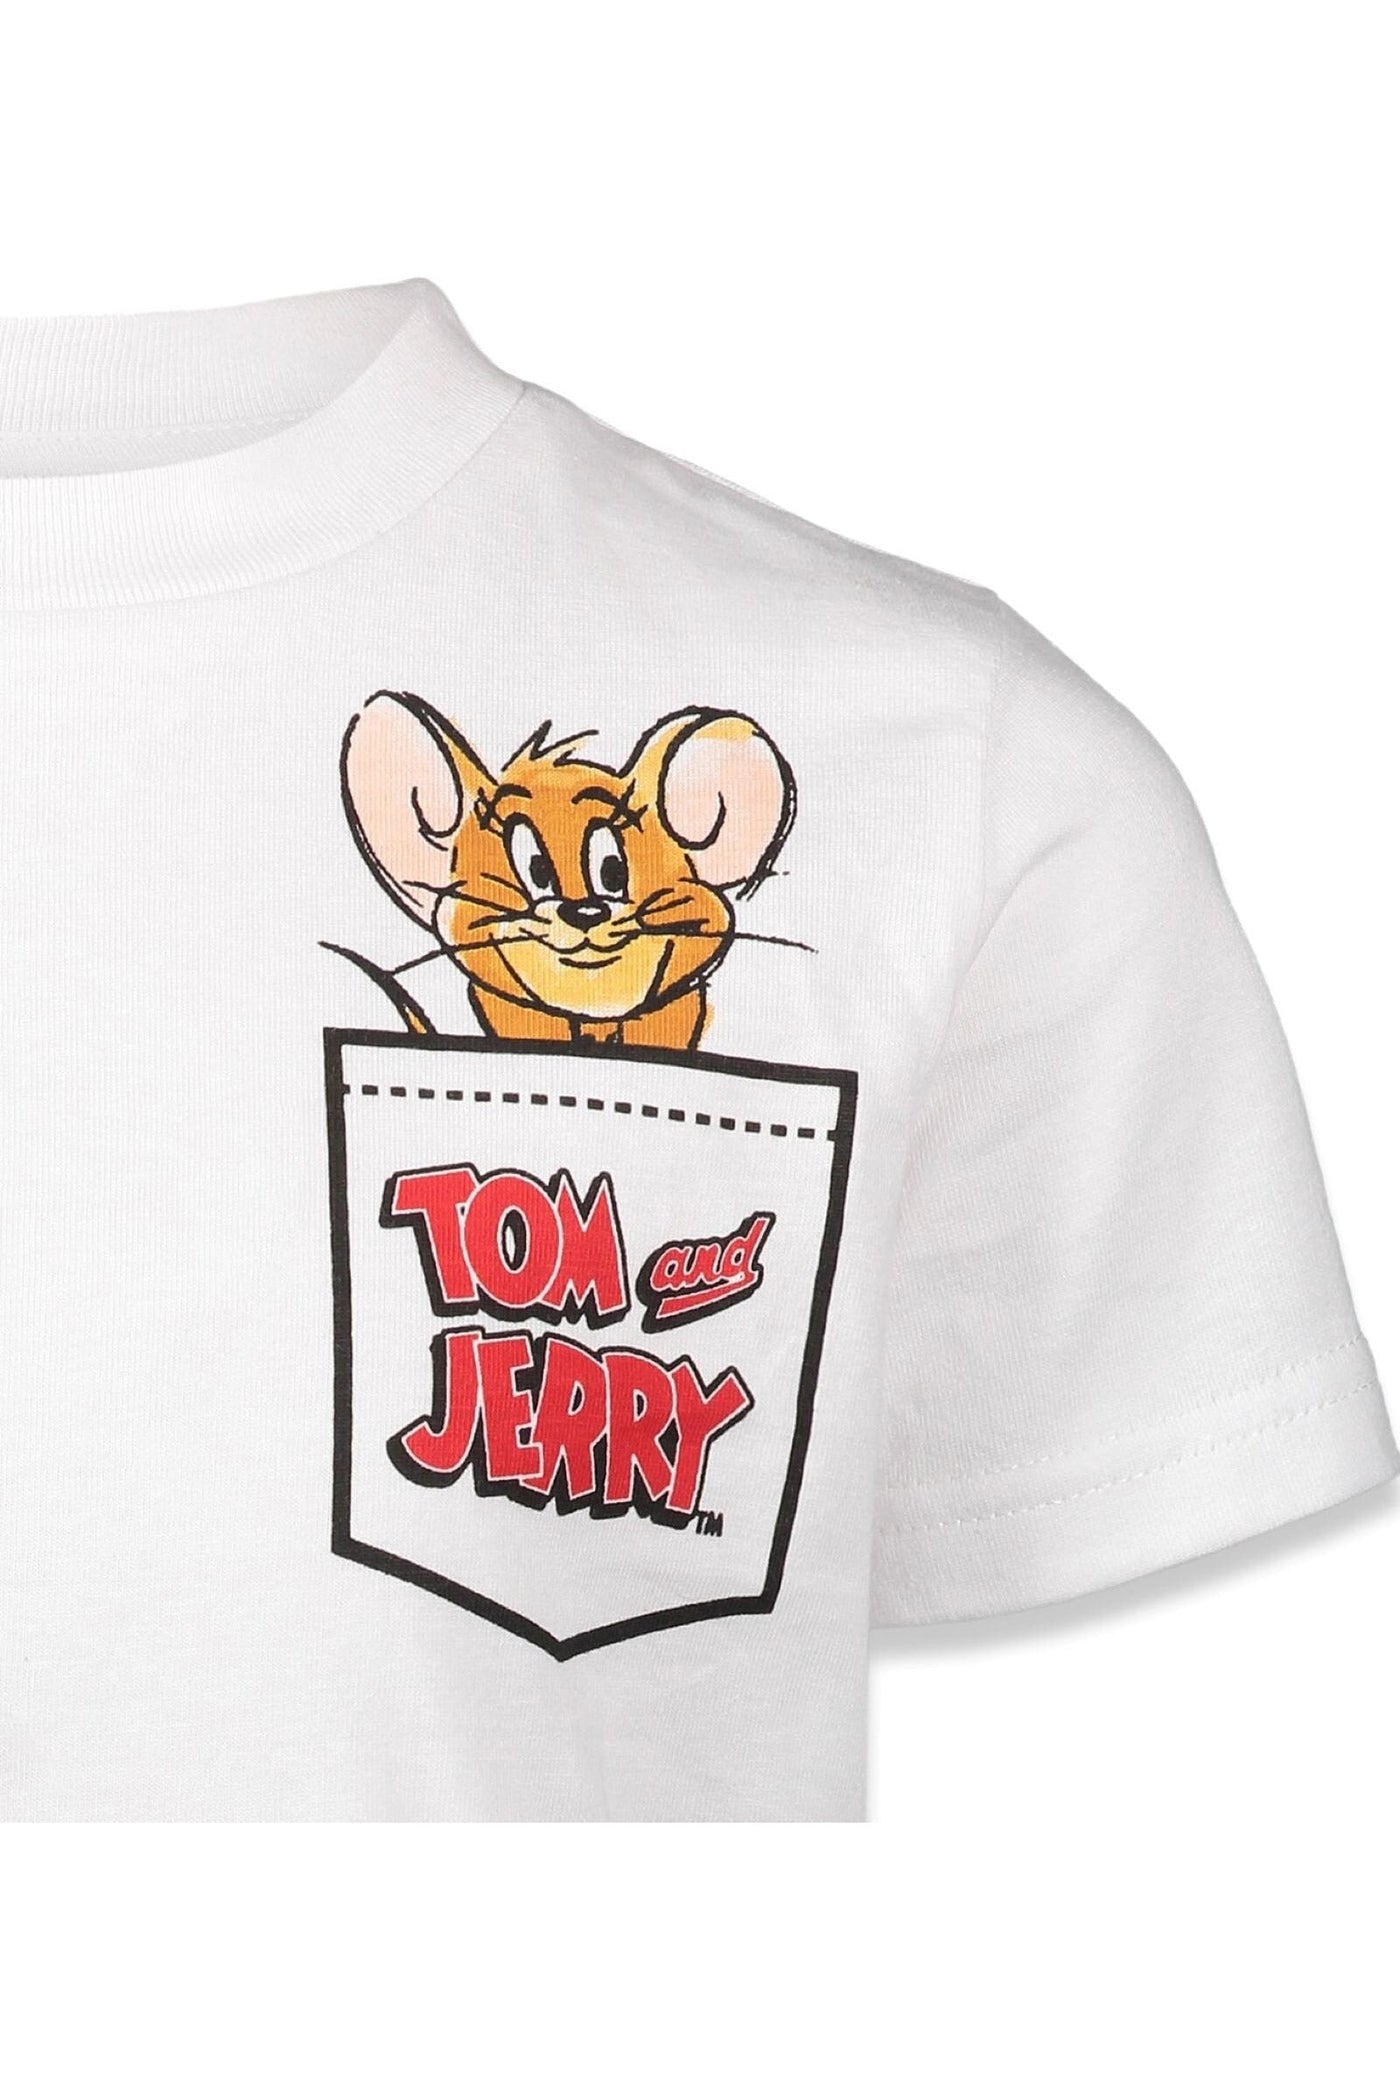 Tom and Jerry 2 Pack Graphic T-Shirt